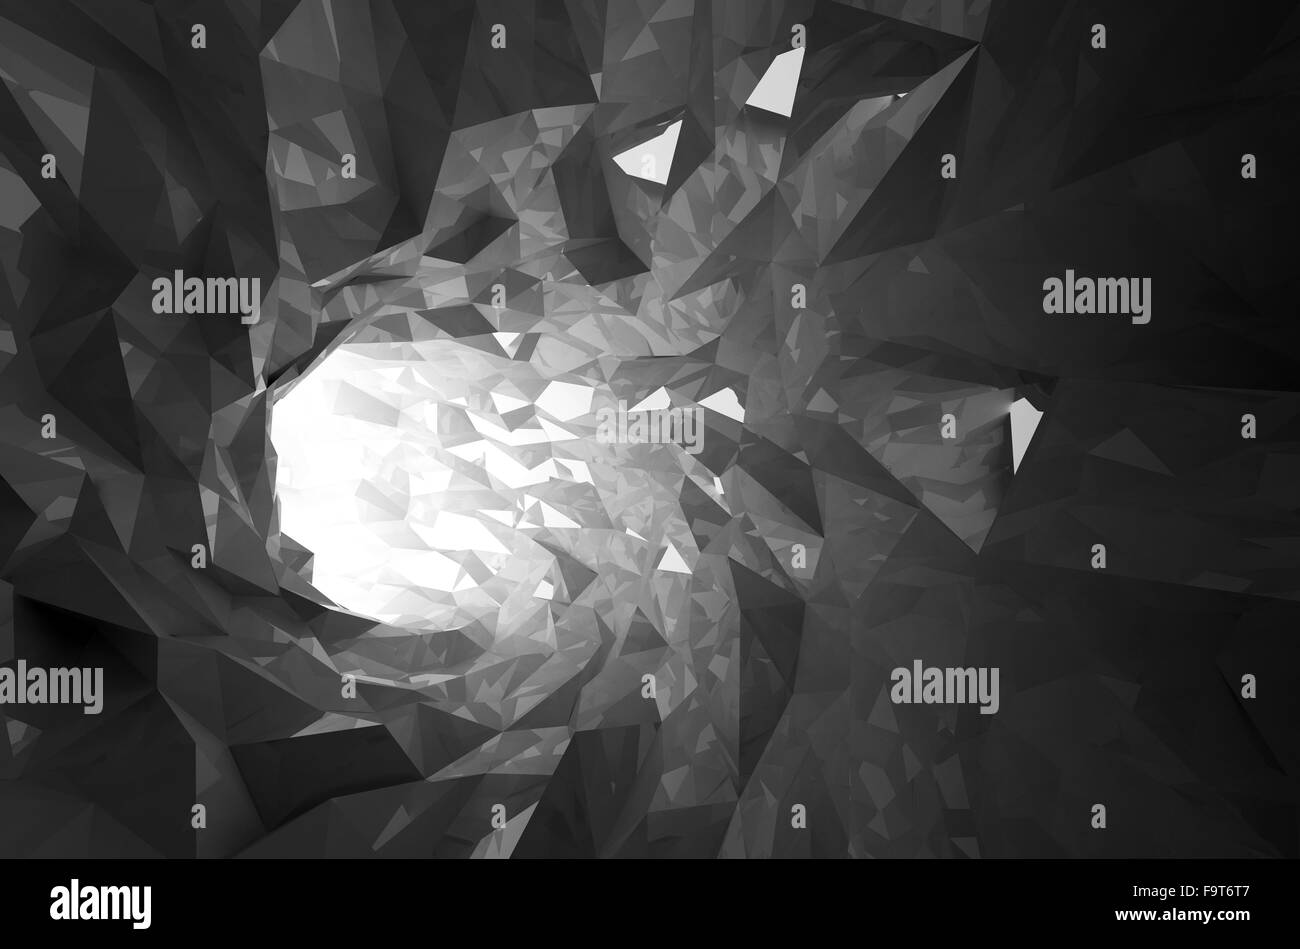 Abstract shining black crystal digital tunnel background. 3d illustration Stock Photo